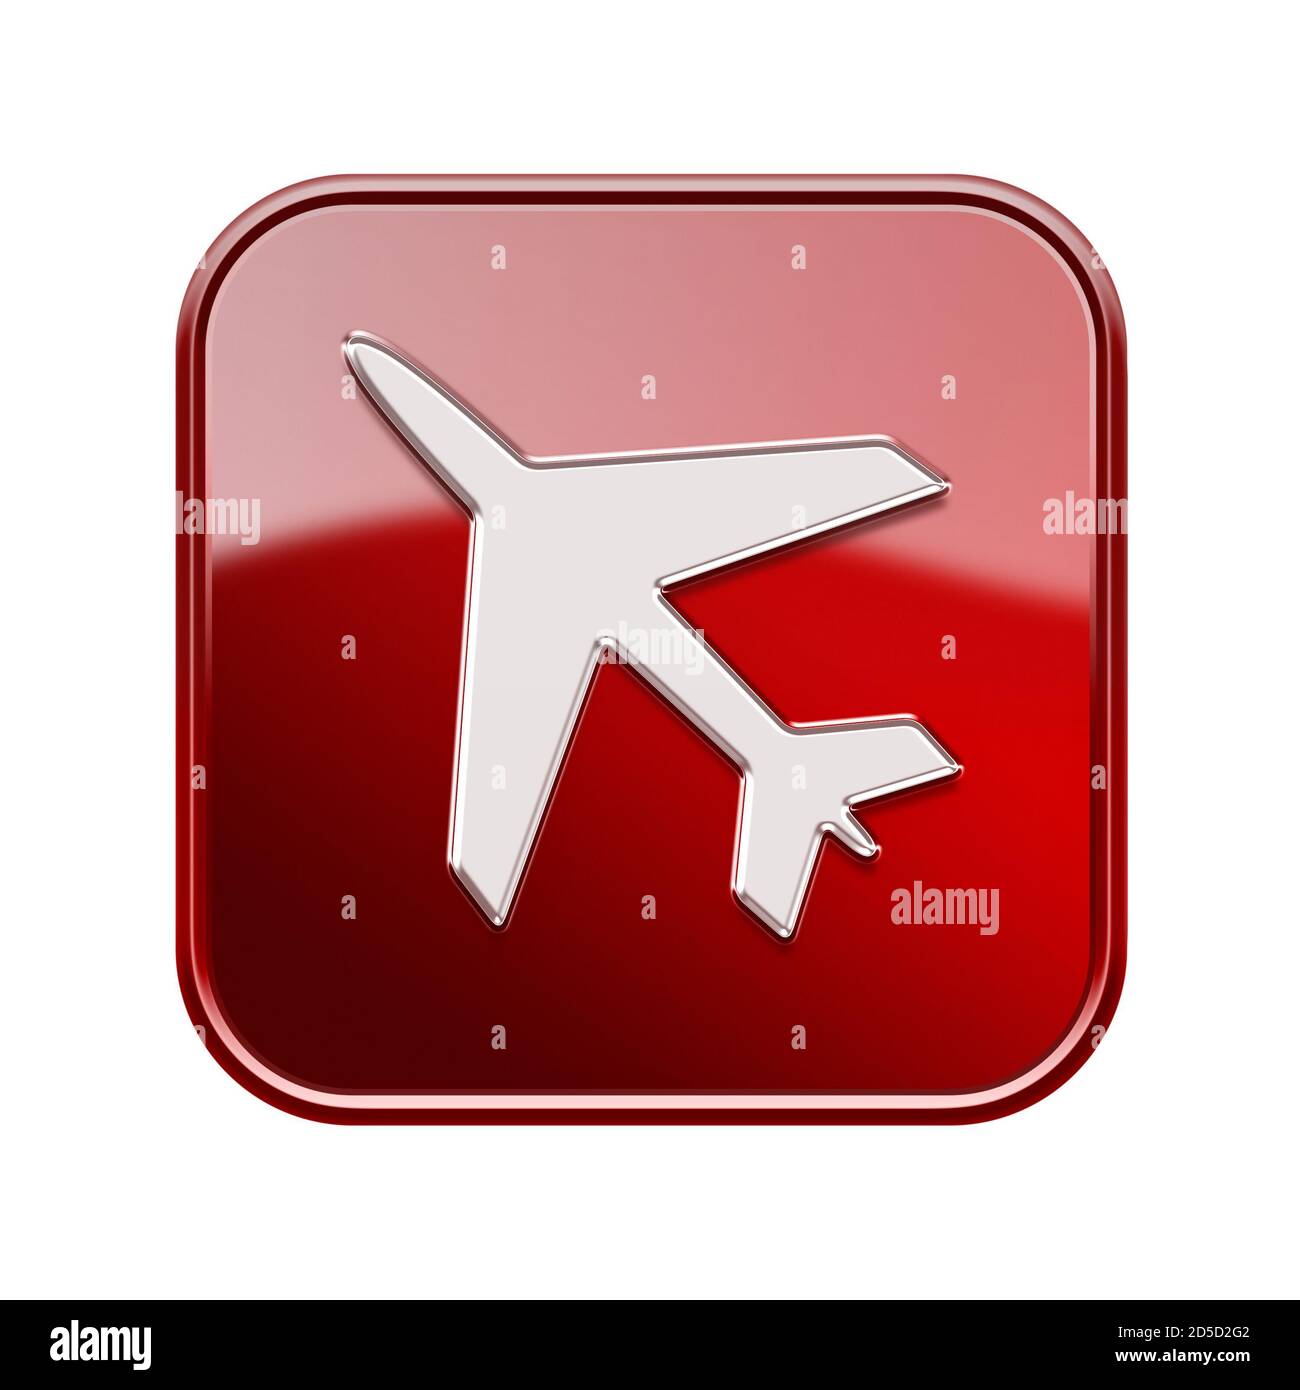 Airplane icon glossy red, isolated on white background Stock Photo